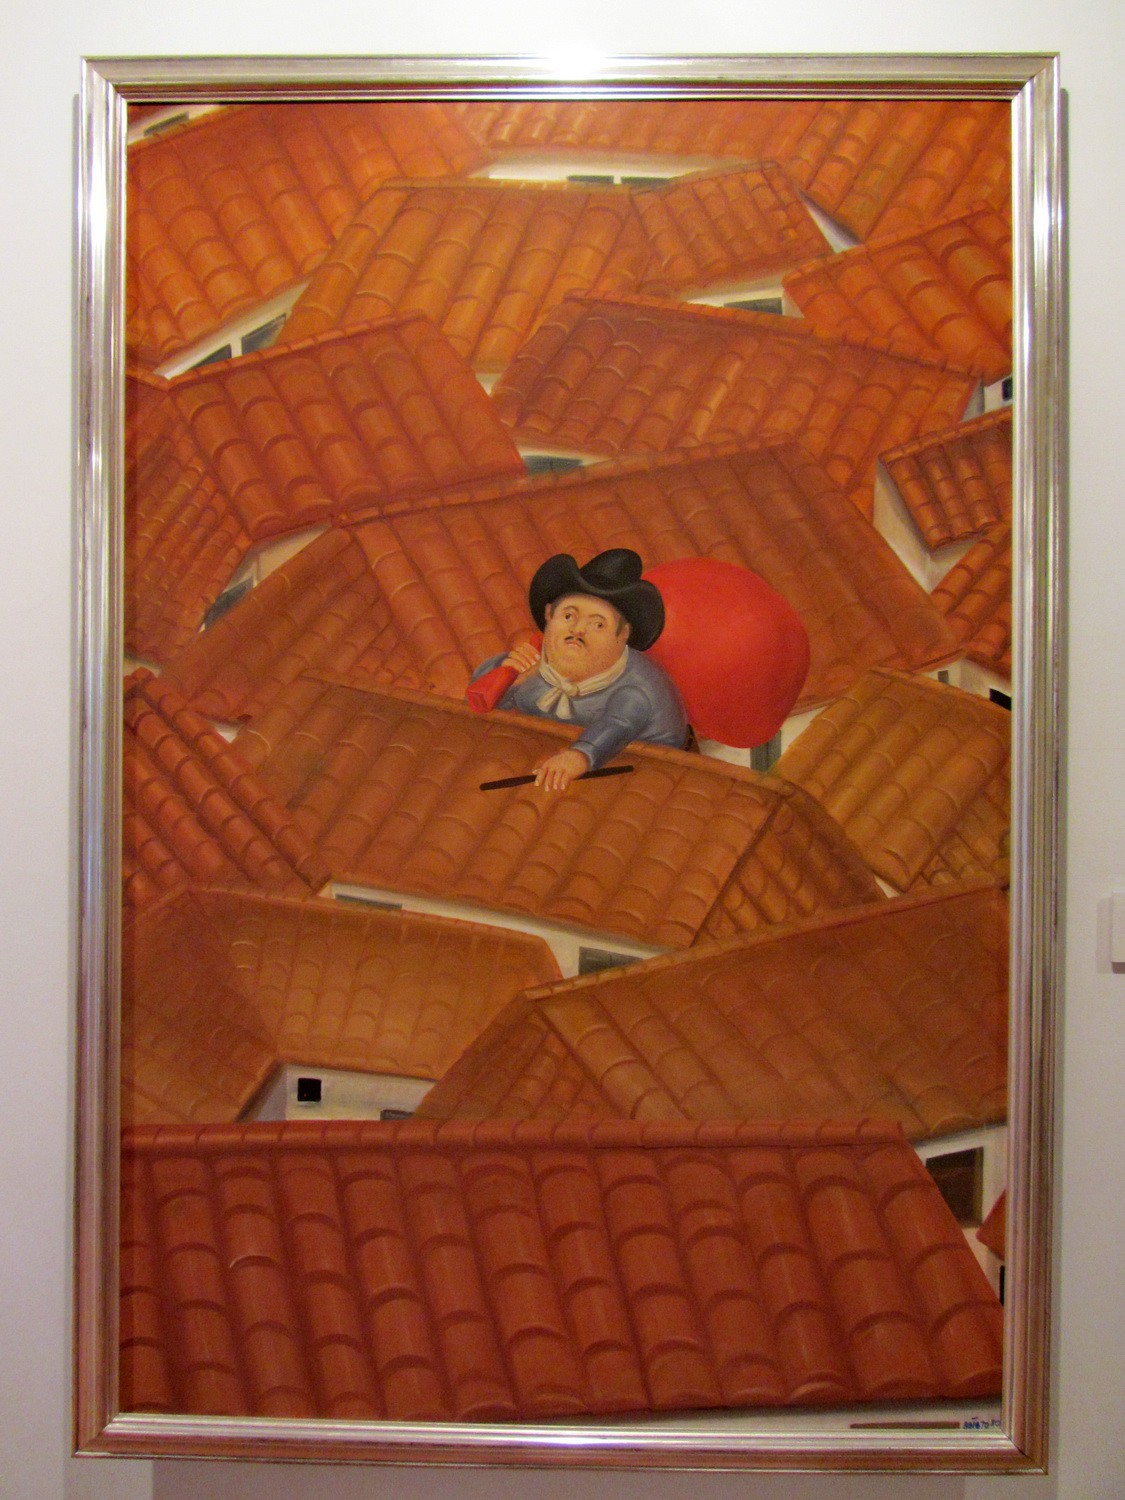 The thief - painted by Fernando Botero and showed in his museum Museo Botero